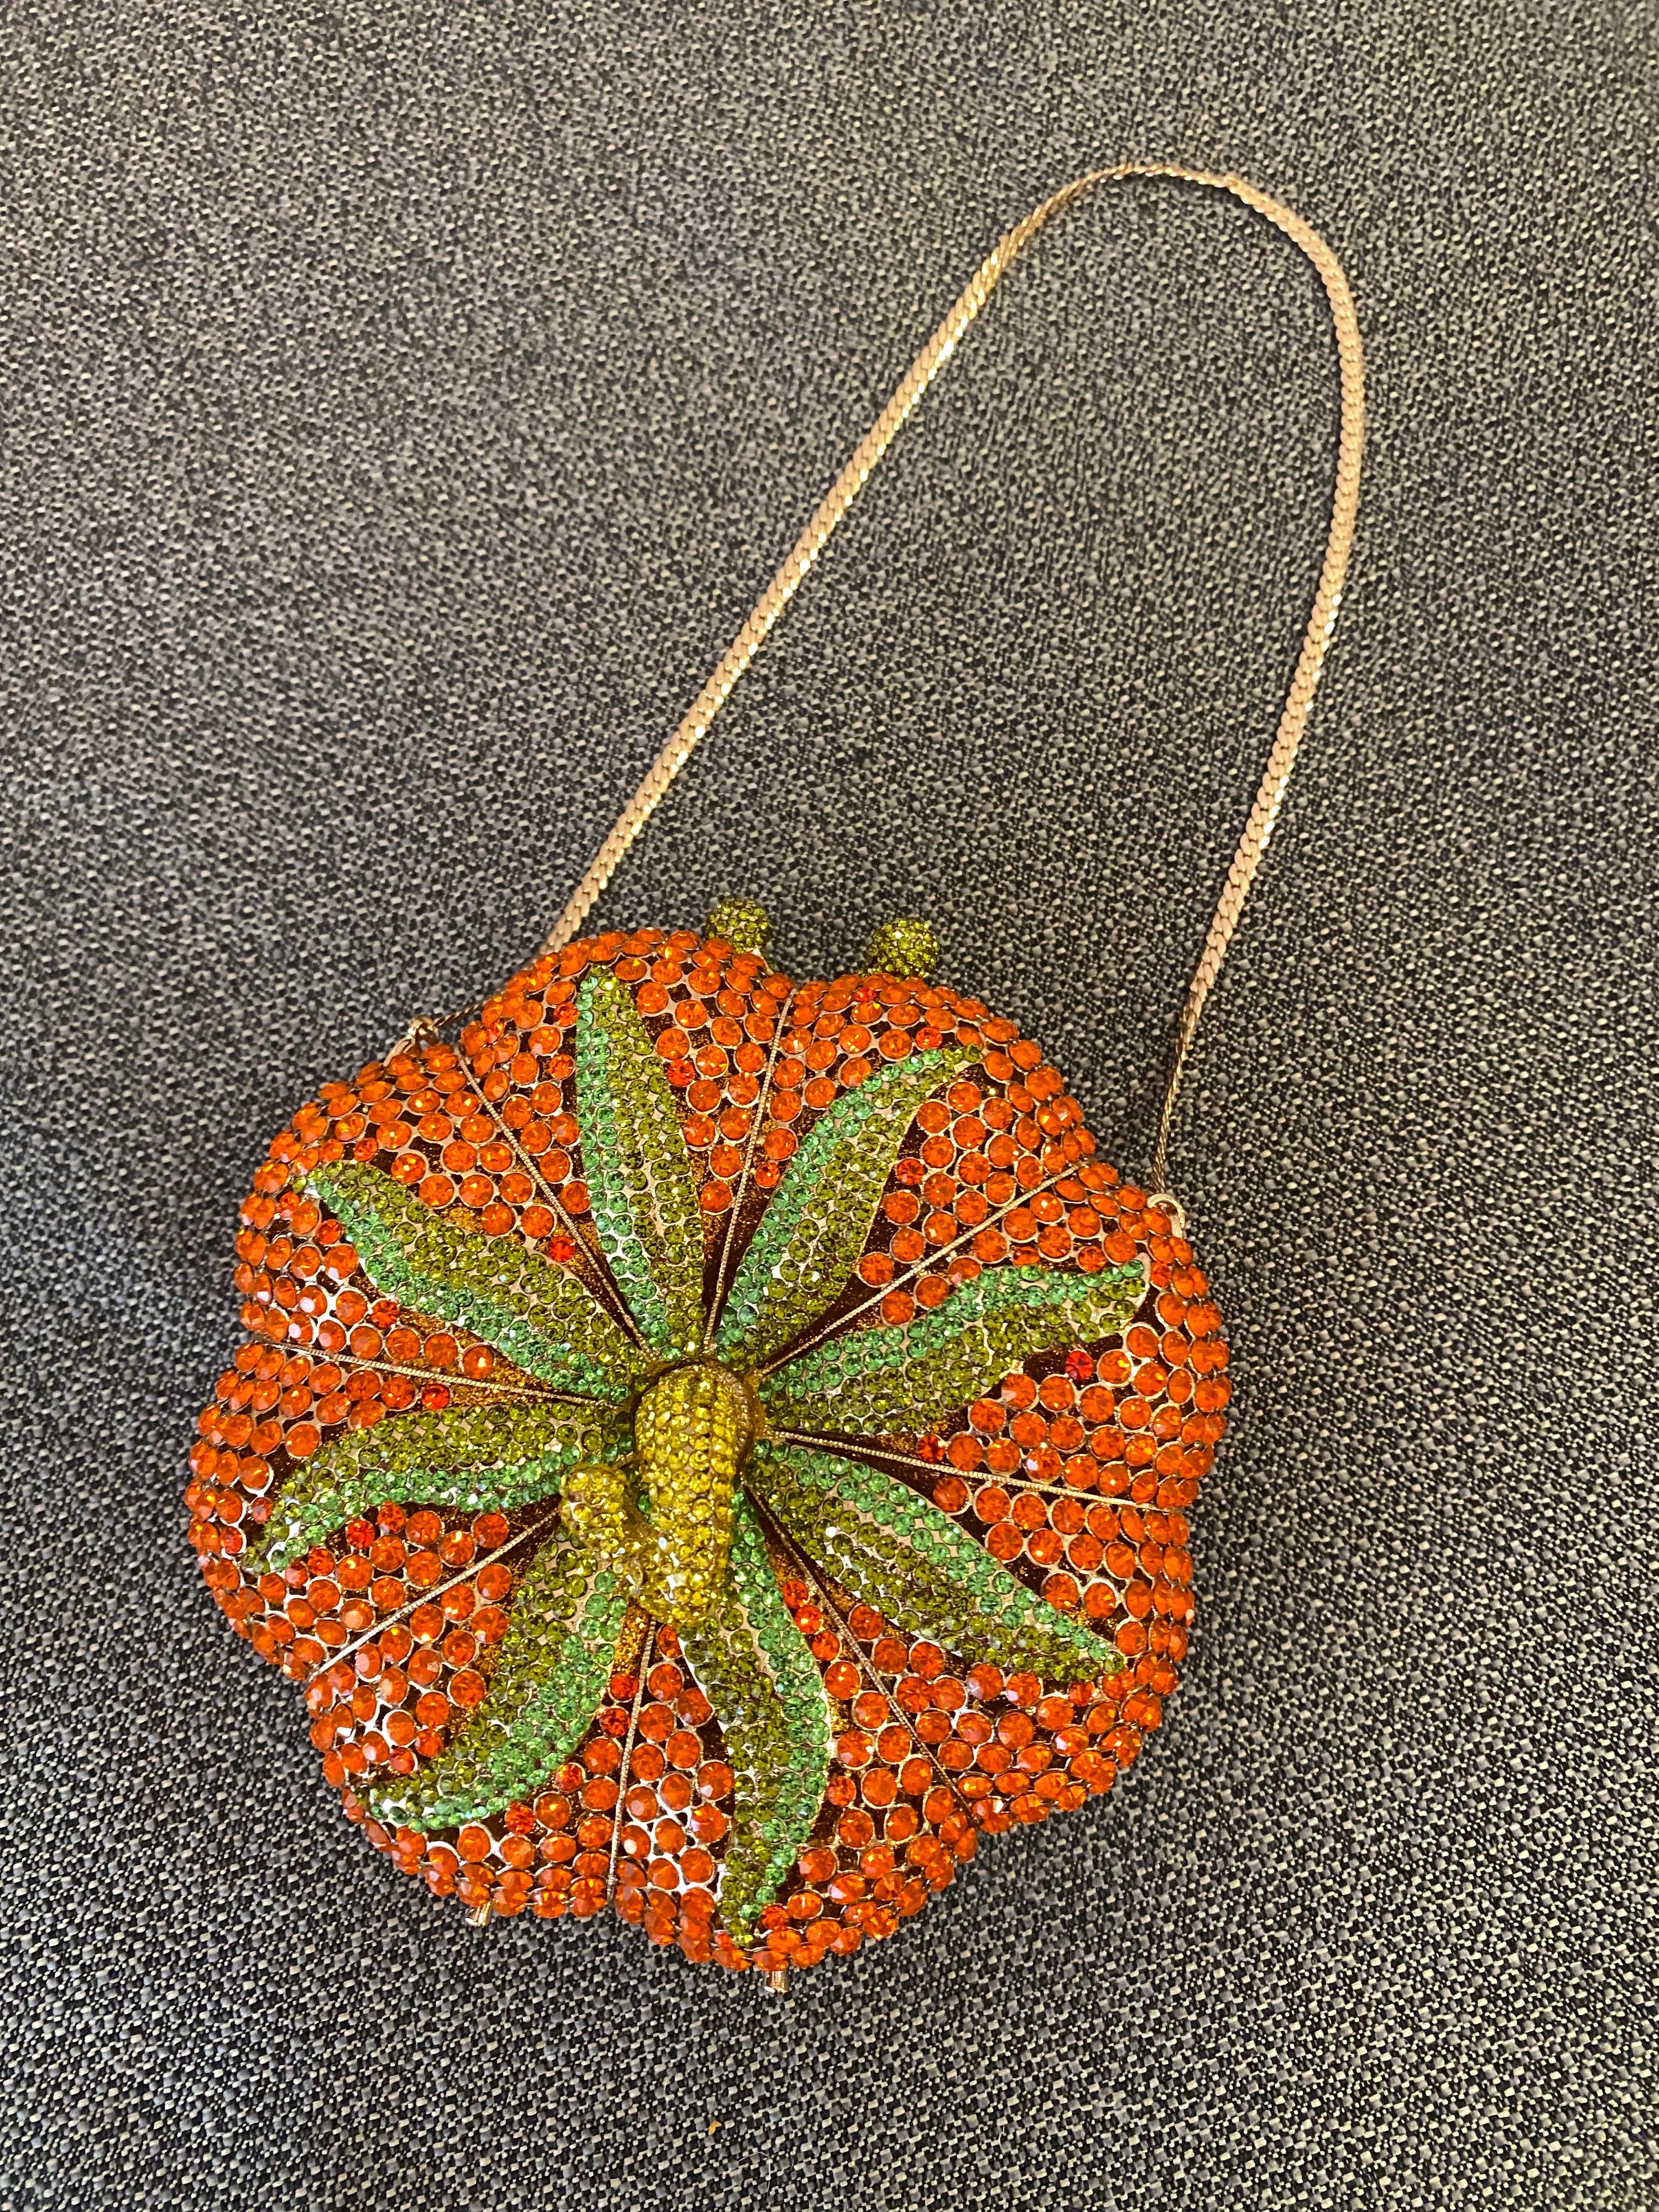 Judith Leiber Style Pumpkin Purse, lot's of Glitz! Nice quality with leather interior.